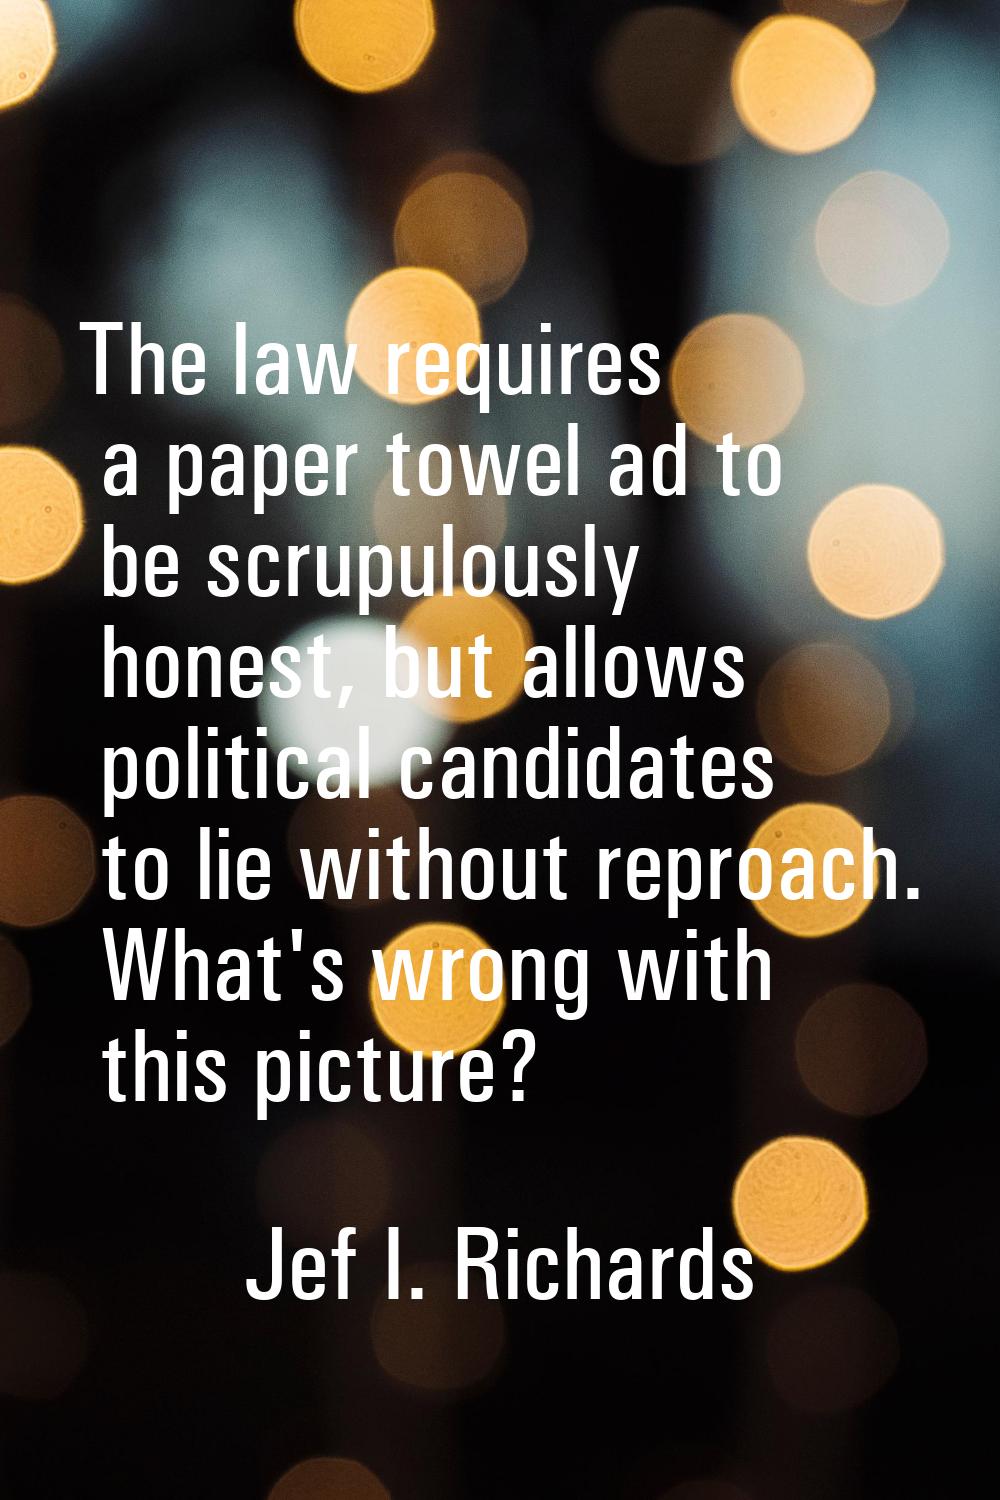 The law requires a paper towel ad to be scrupulously honest, but allows political candidates to lie